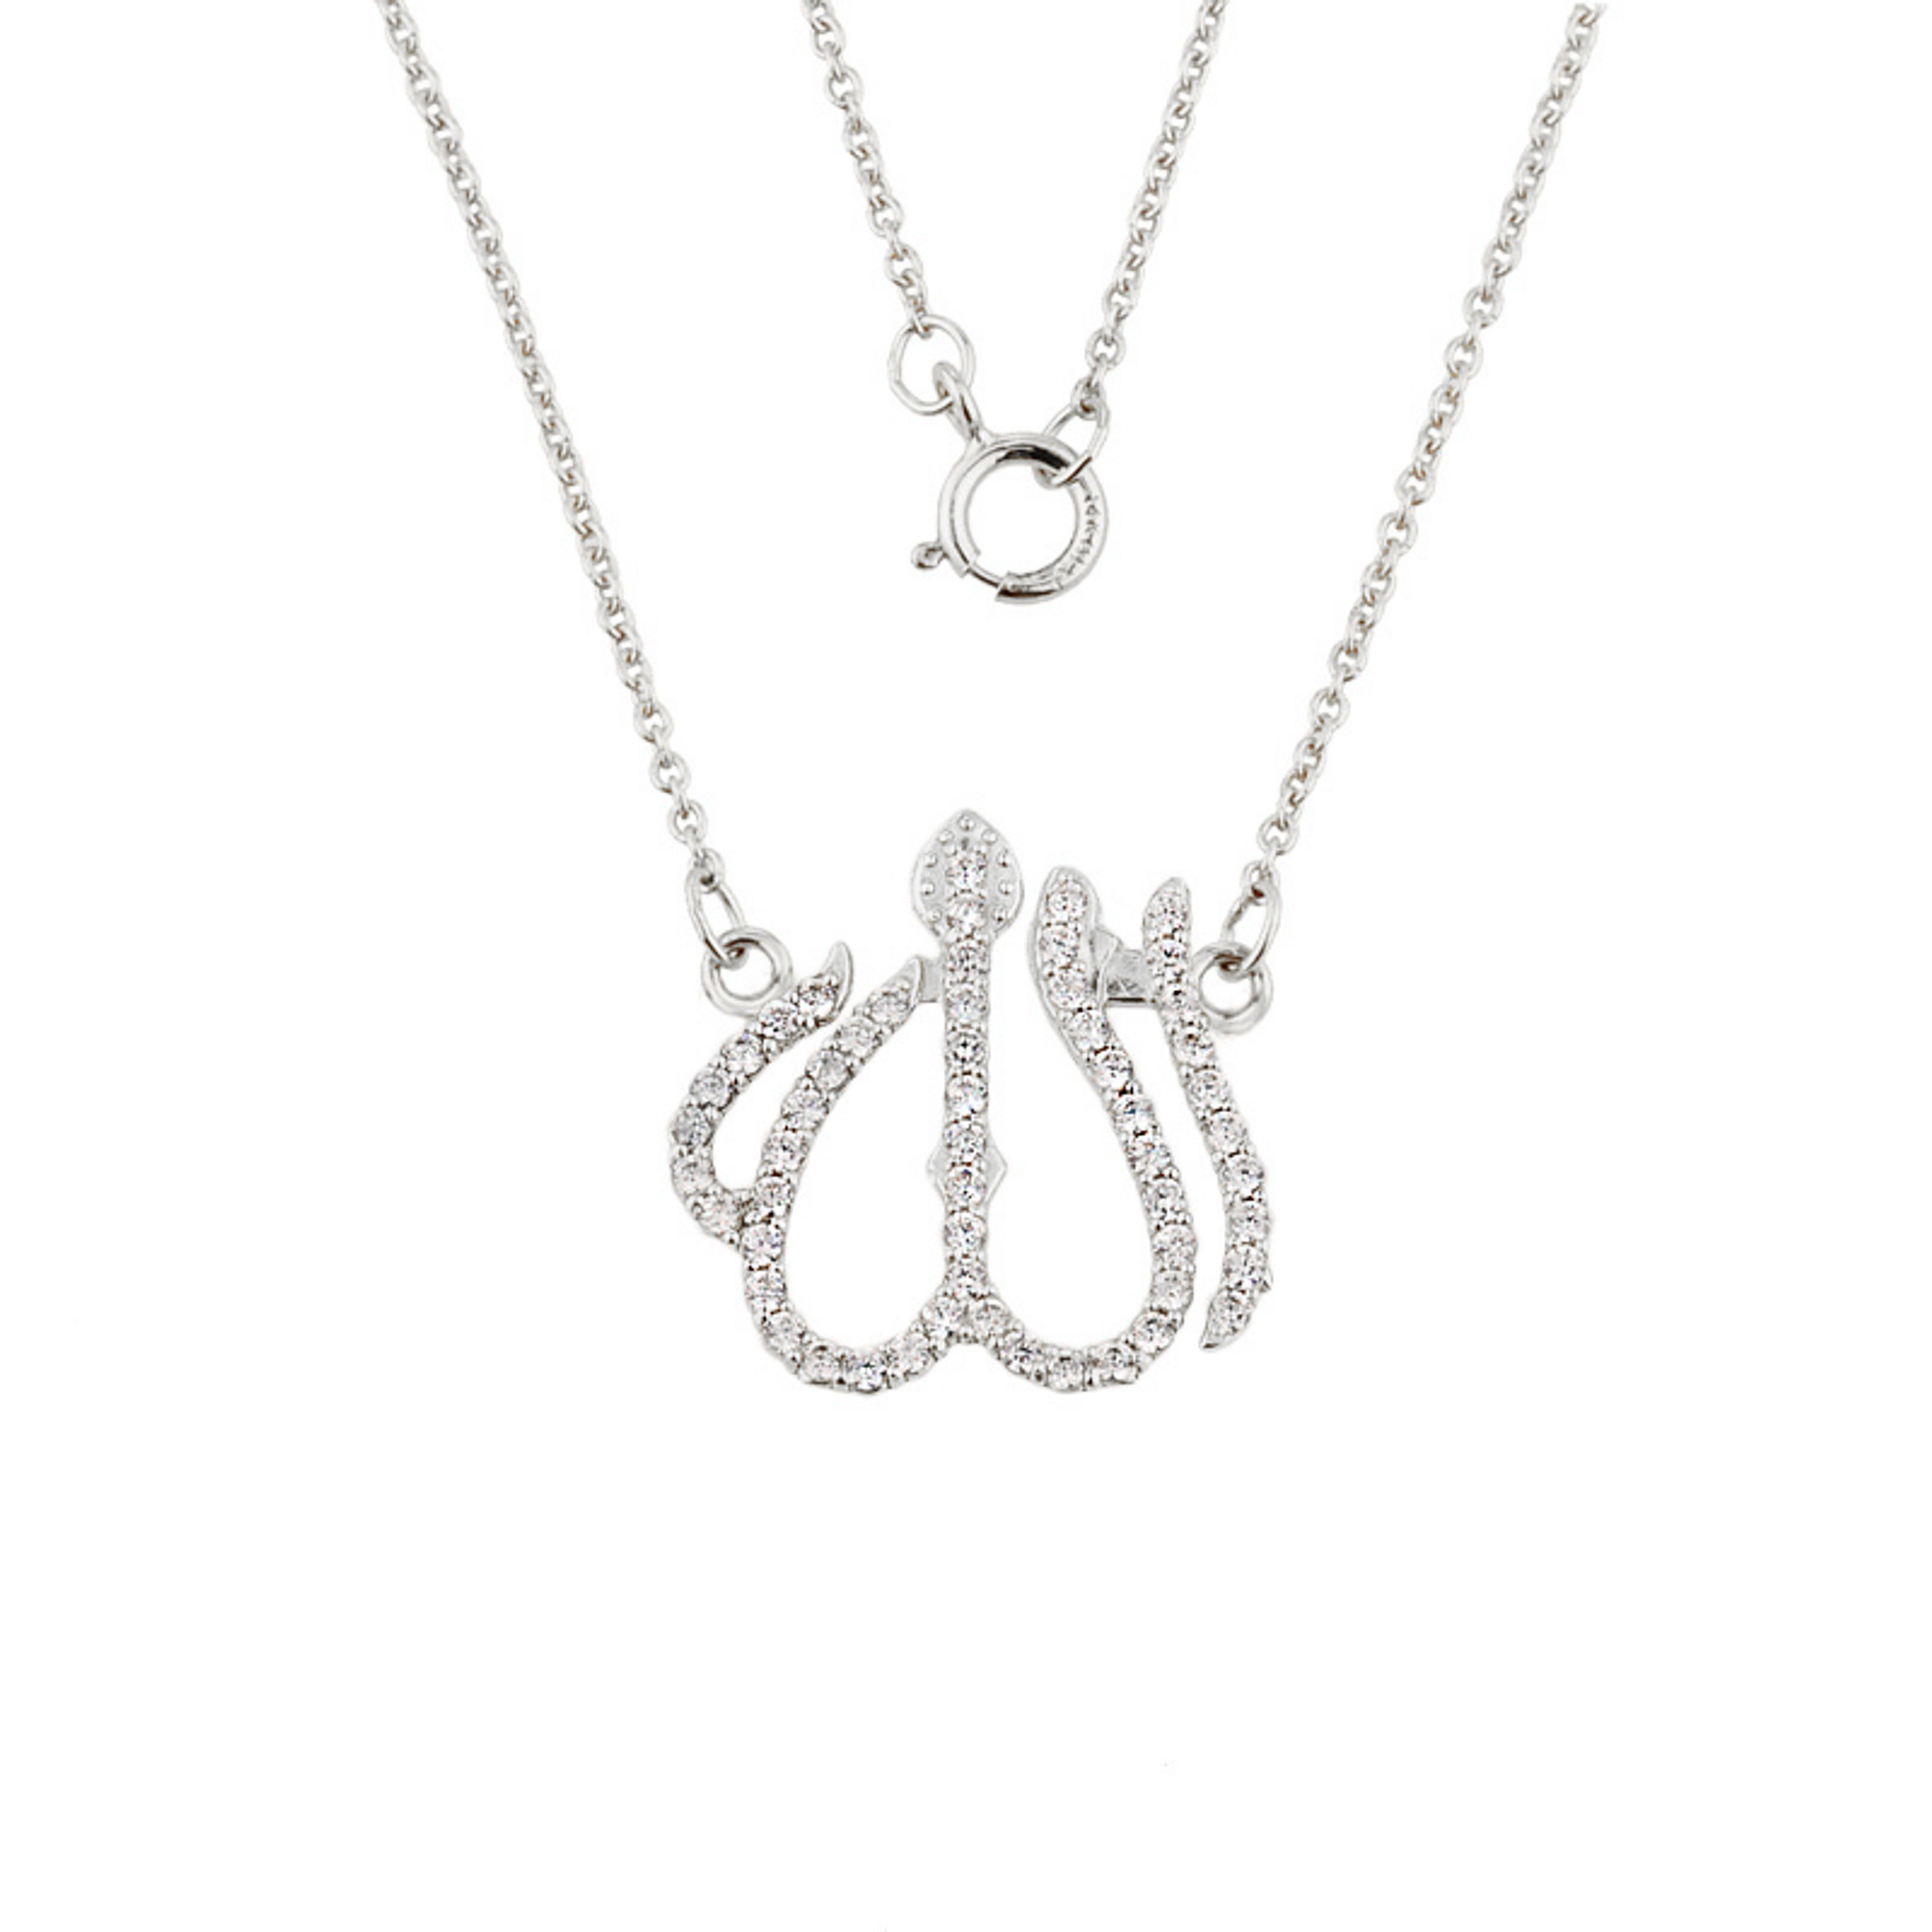 14k White Gold Diamonds Studded Allah Pendant Necklace with Rolo Chain.